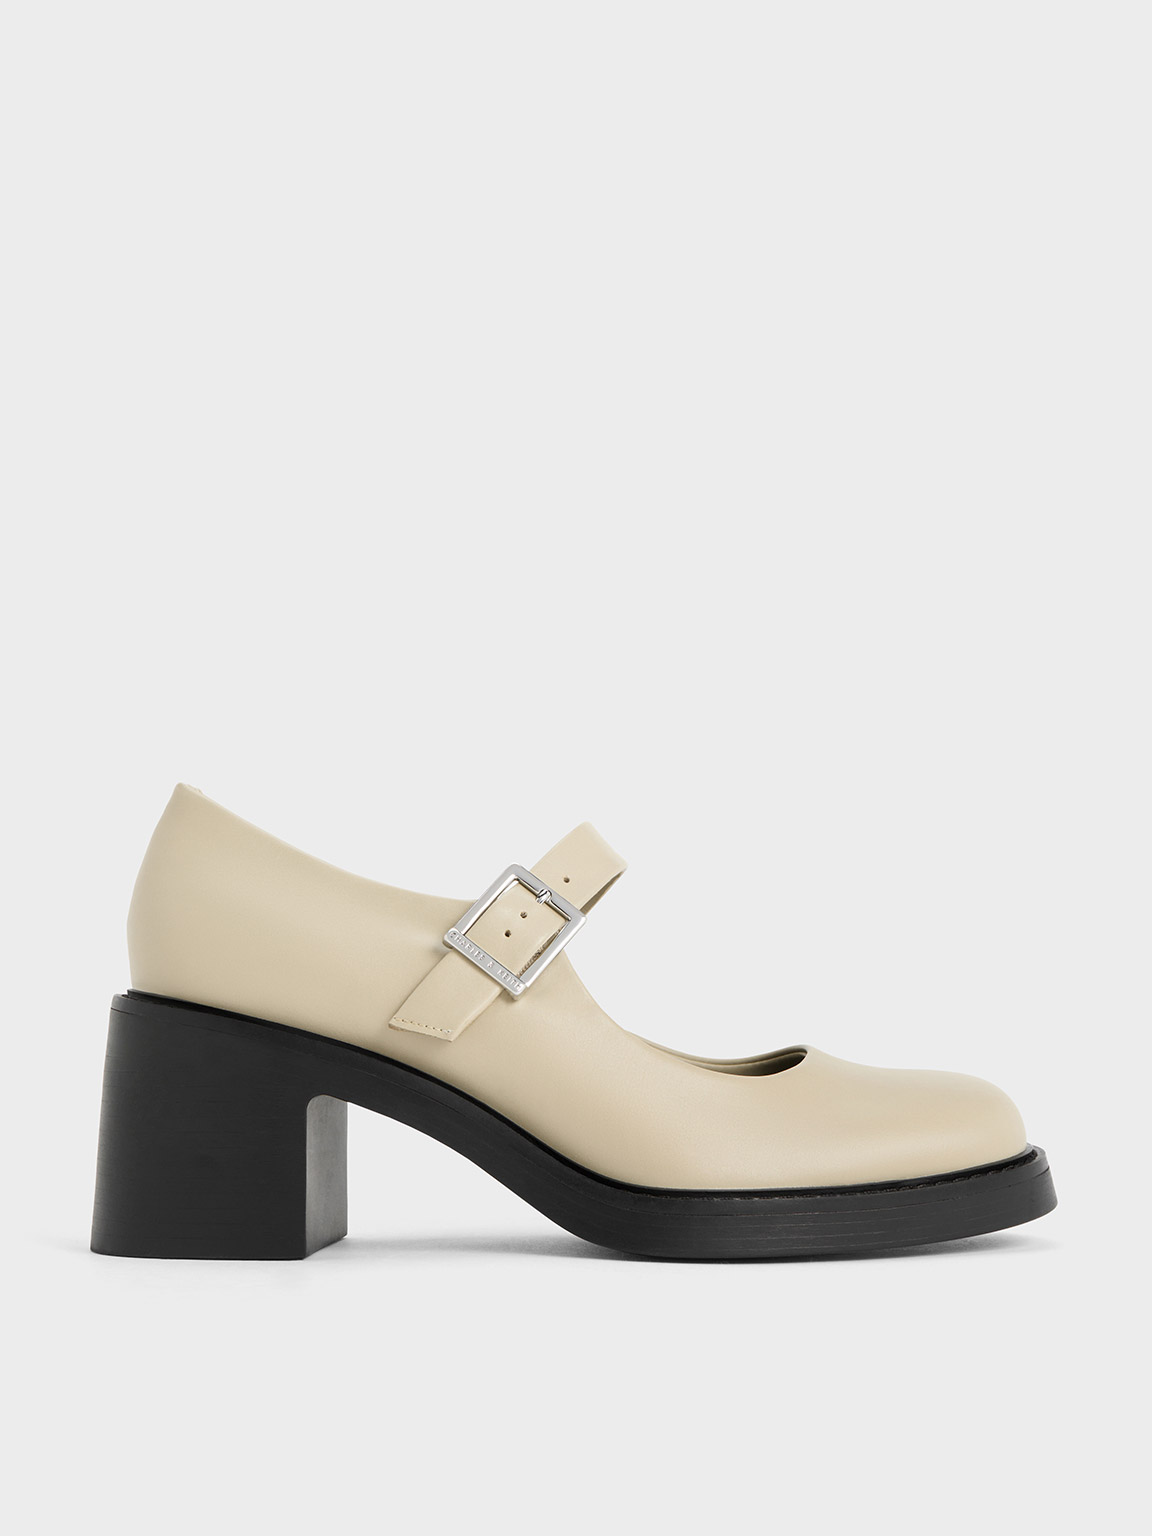 Charles & Keith Hester Mary Jane Block-heel Pumps In Chalk